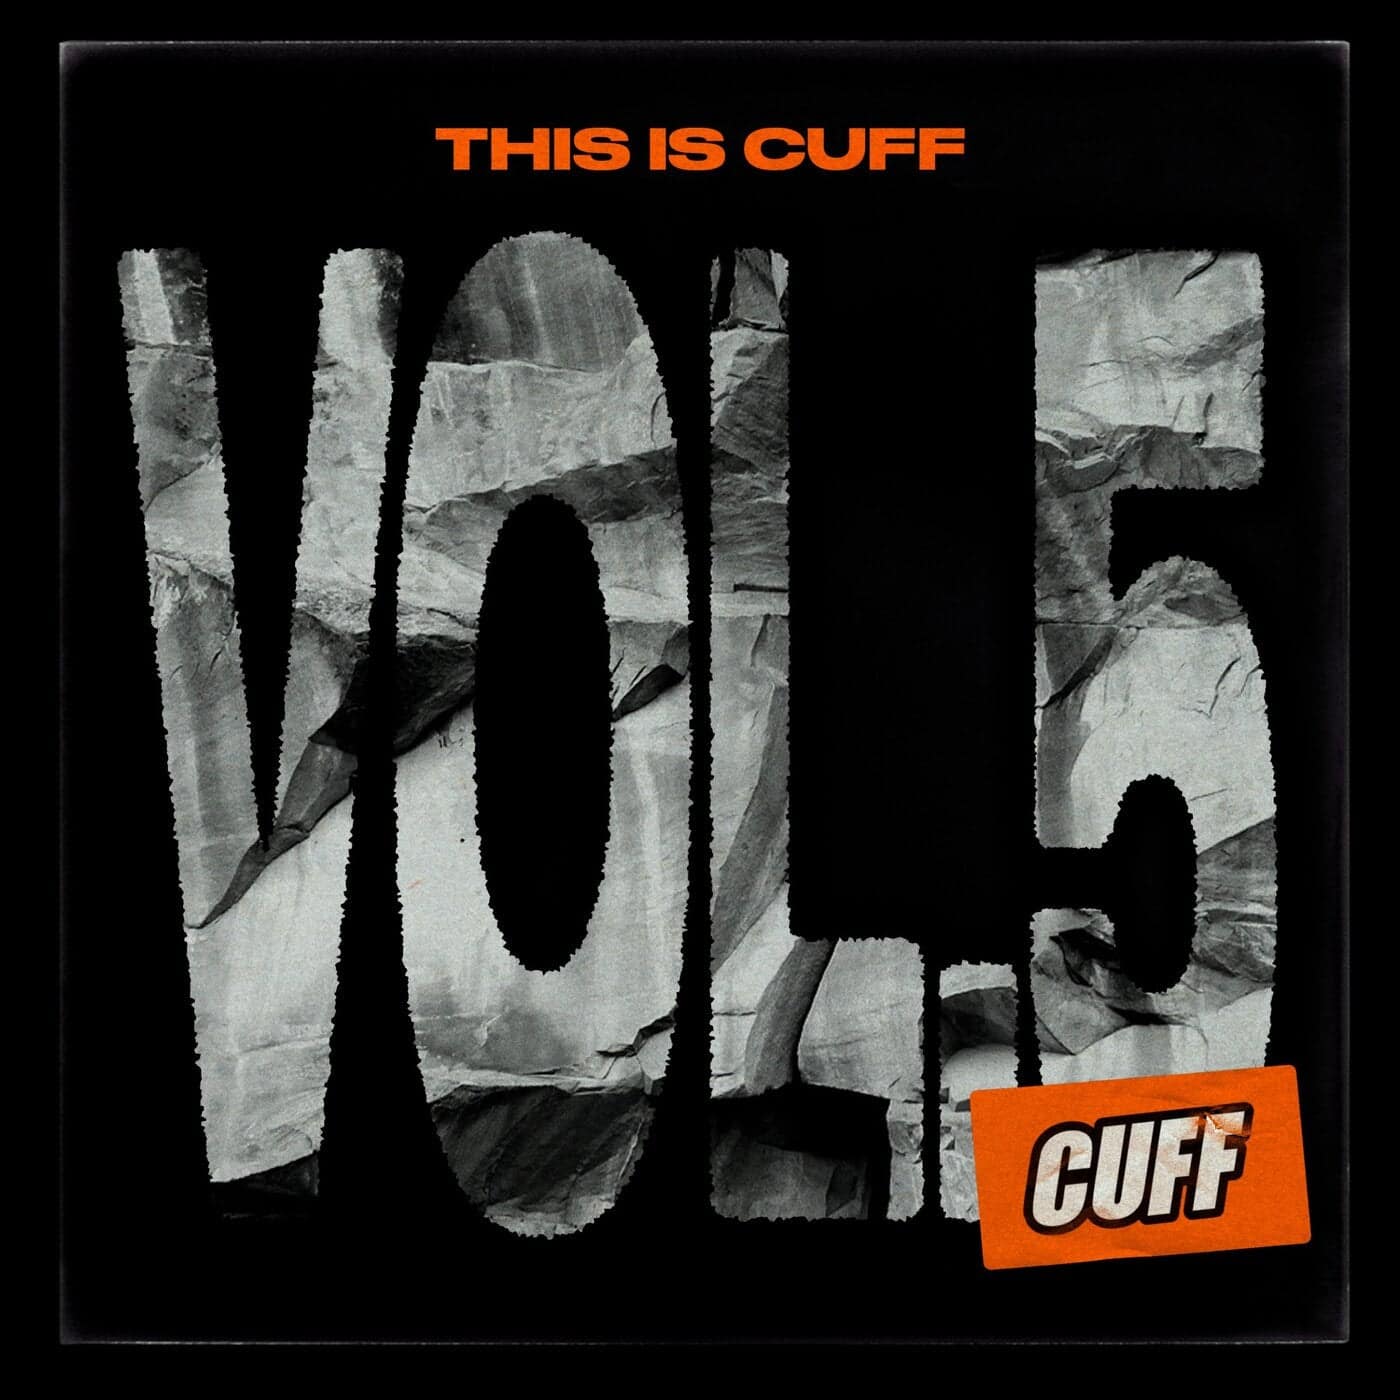 Download VA - This Is CUFF Vol. 5 on Electrobuzz